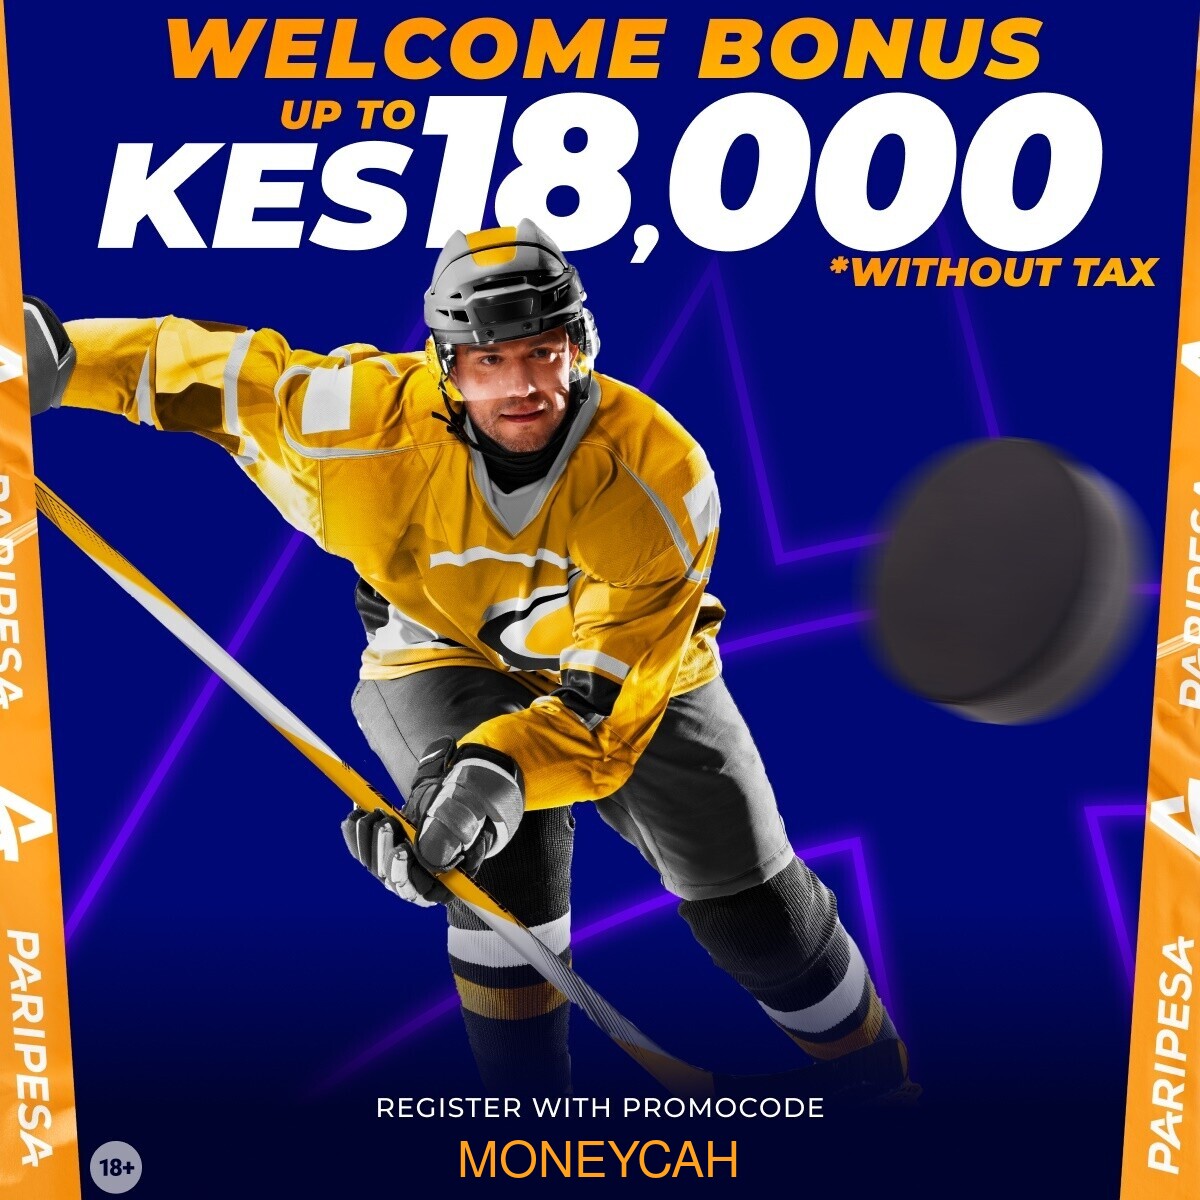 Get a welcome bonus when you bet with Paripesa Register;paripesa.bet/moneycah App Download: paripesa.bet/moneycahapp Use my promocode MONEYCAH for you to get upto 18,000 welcome on your first deposit